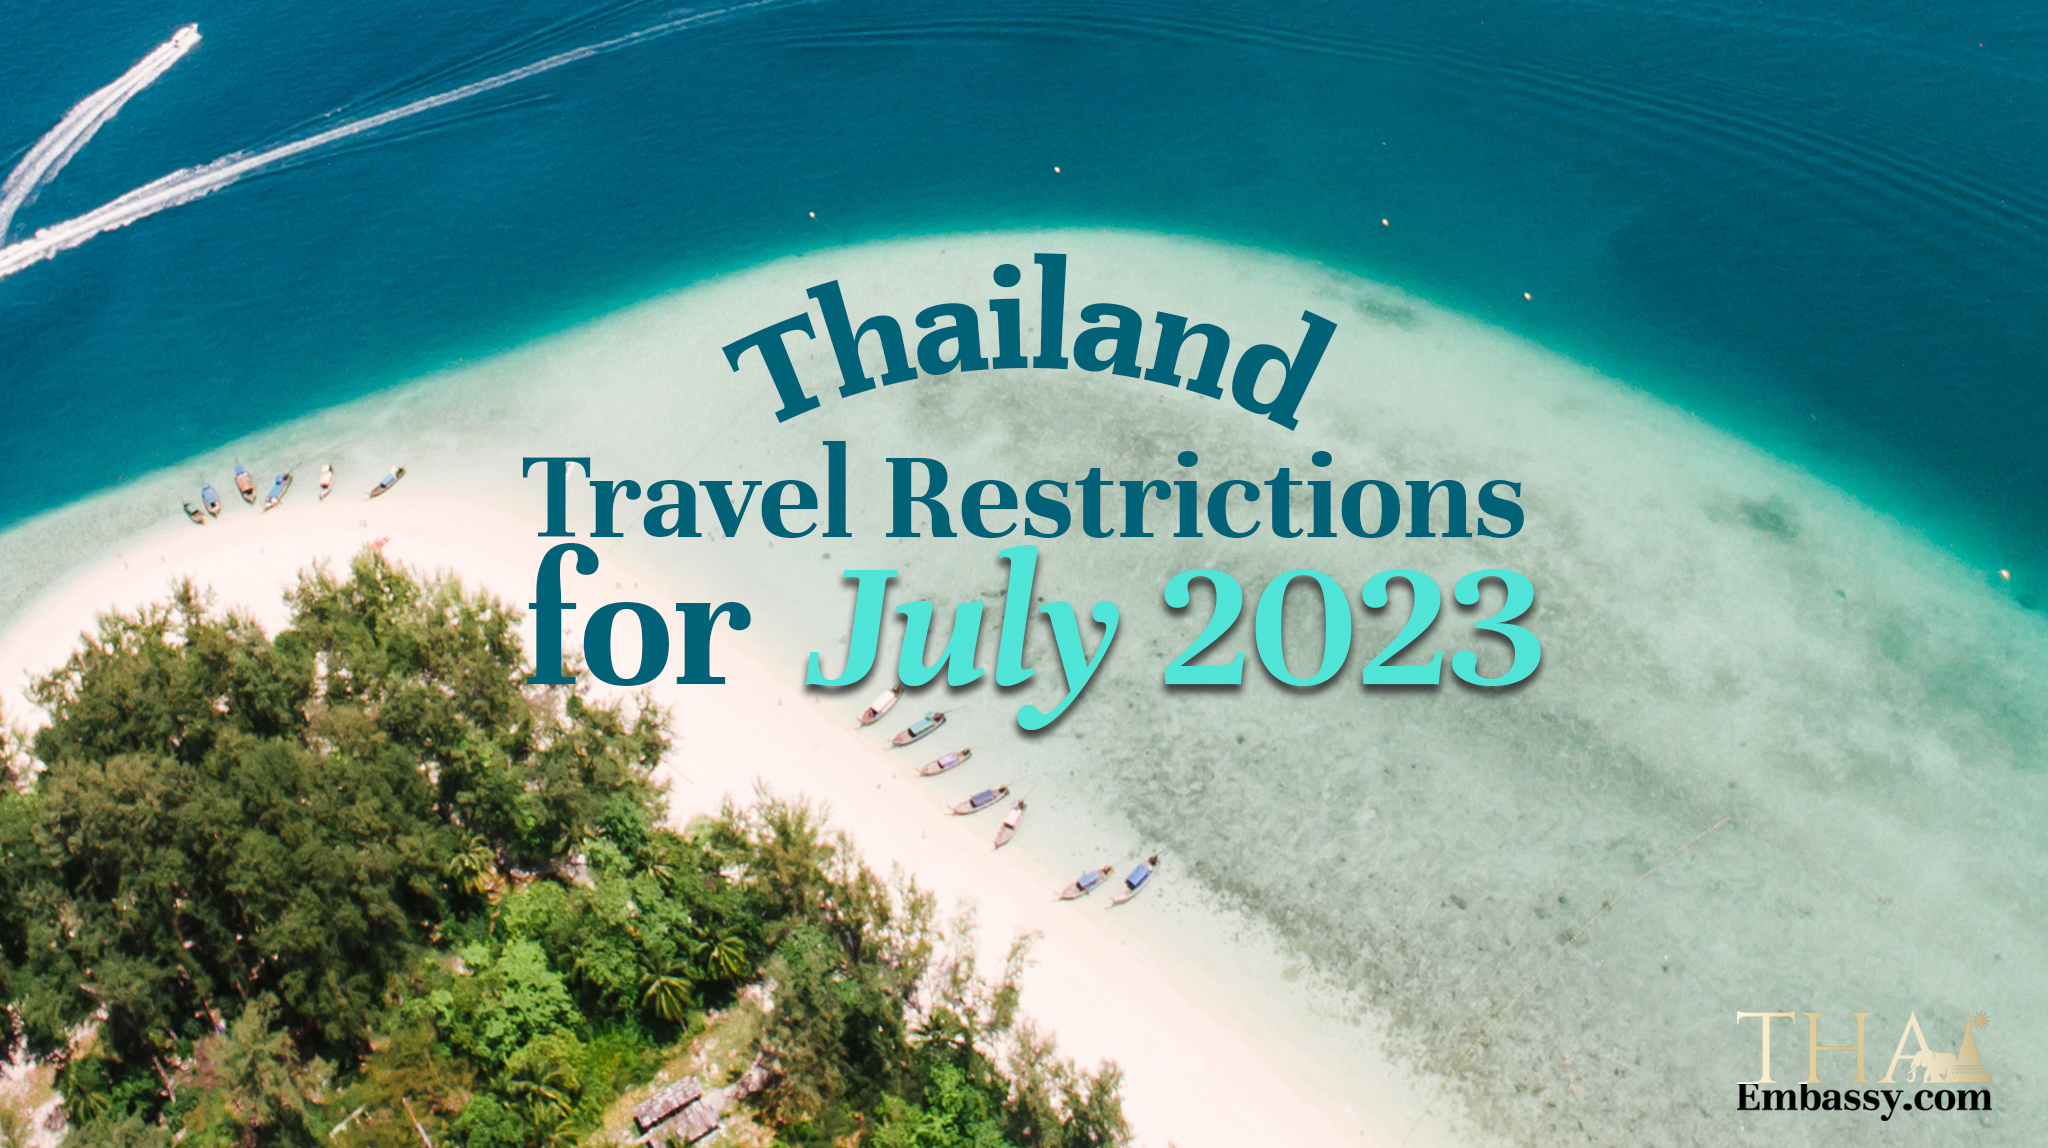 thailand new travel restrictions 2023